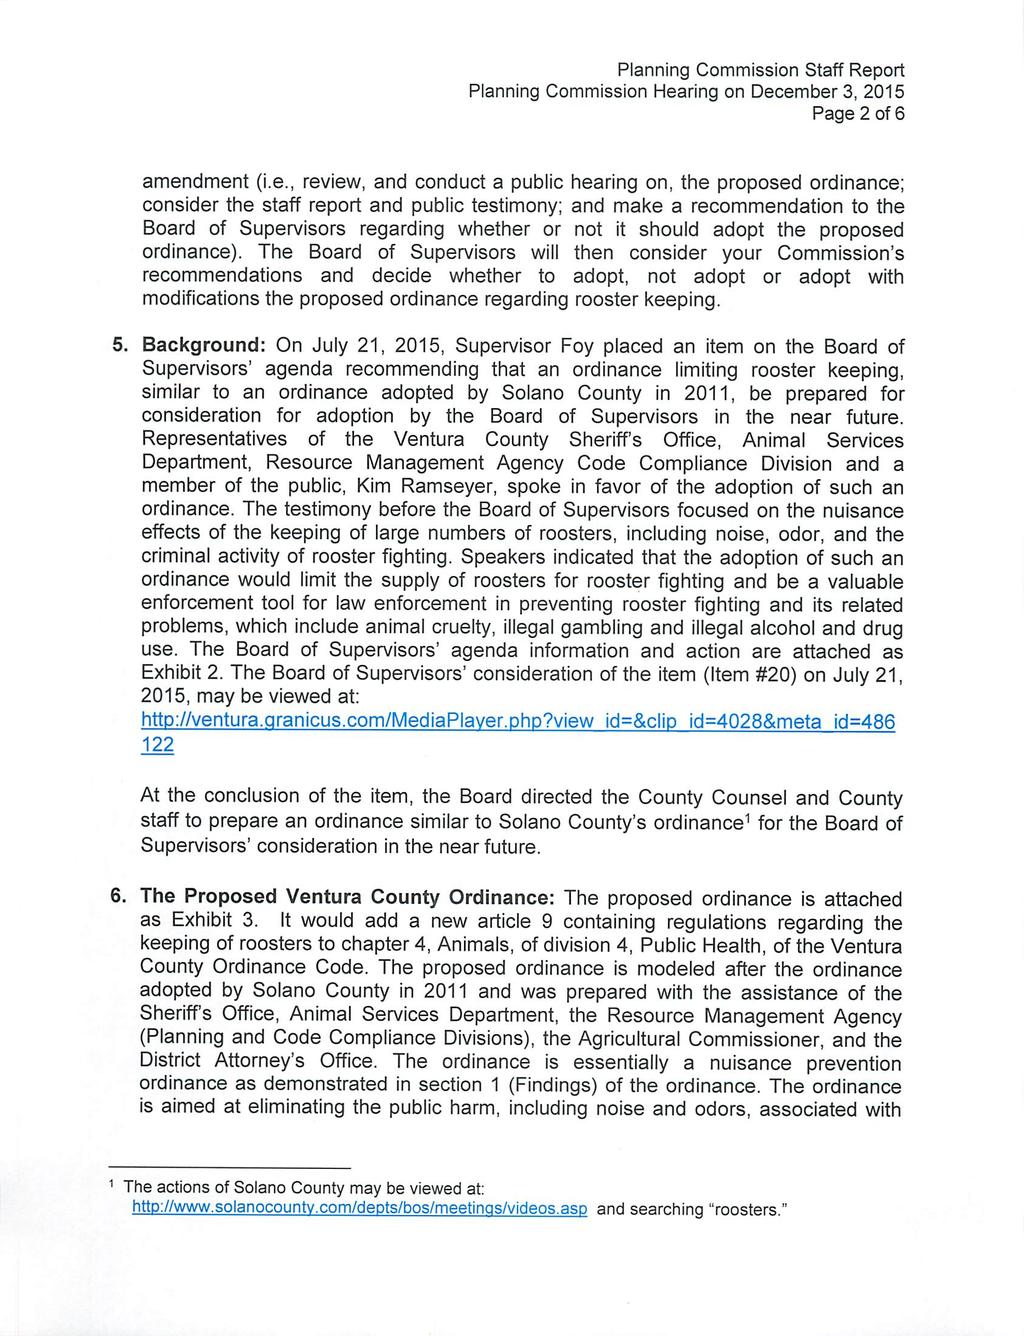 Planning Commission Staff Report Planning Commission Hearing on December 3, 2015 Page 2 of 6 Planning Commission Staff Report Planning Commission Hearing on December 3, 2015 Page 2 of 6 amendment (i.